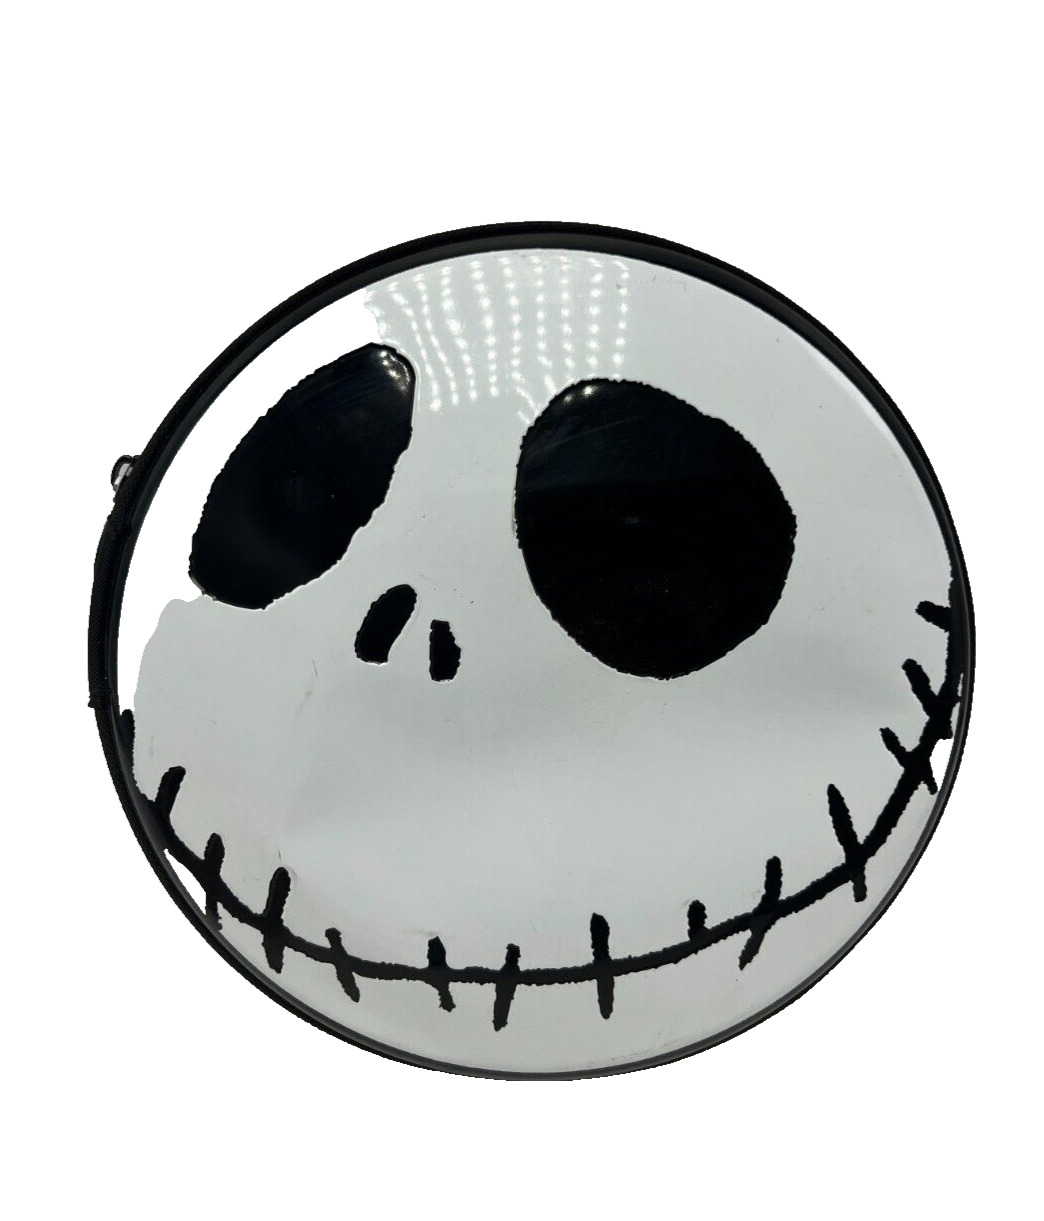 Nightmare Before Christmas soundtrack Limited Edition CD in zipper pouch and pin